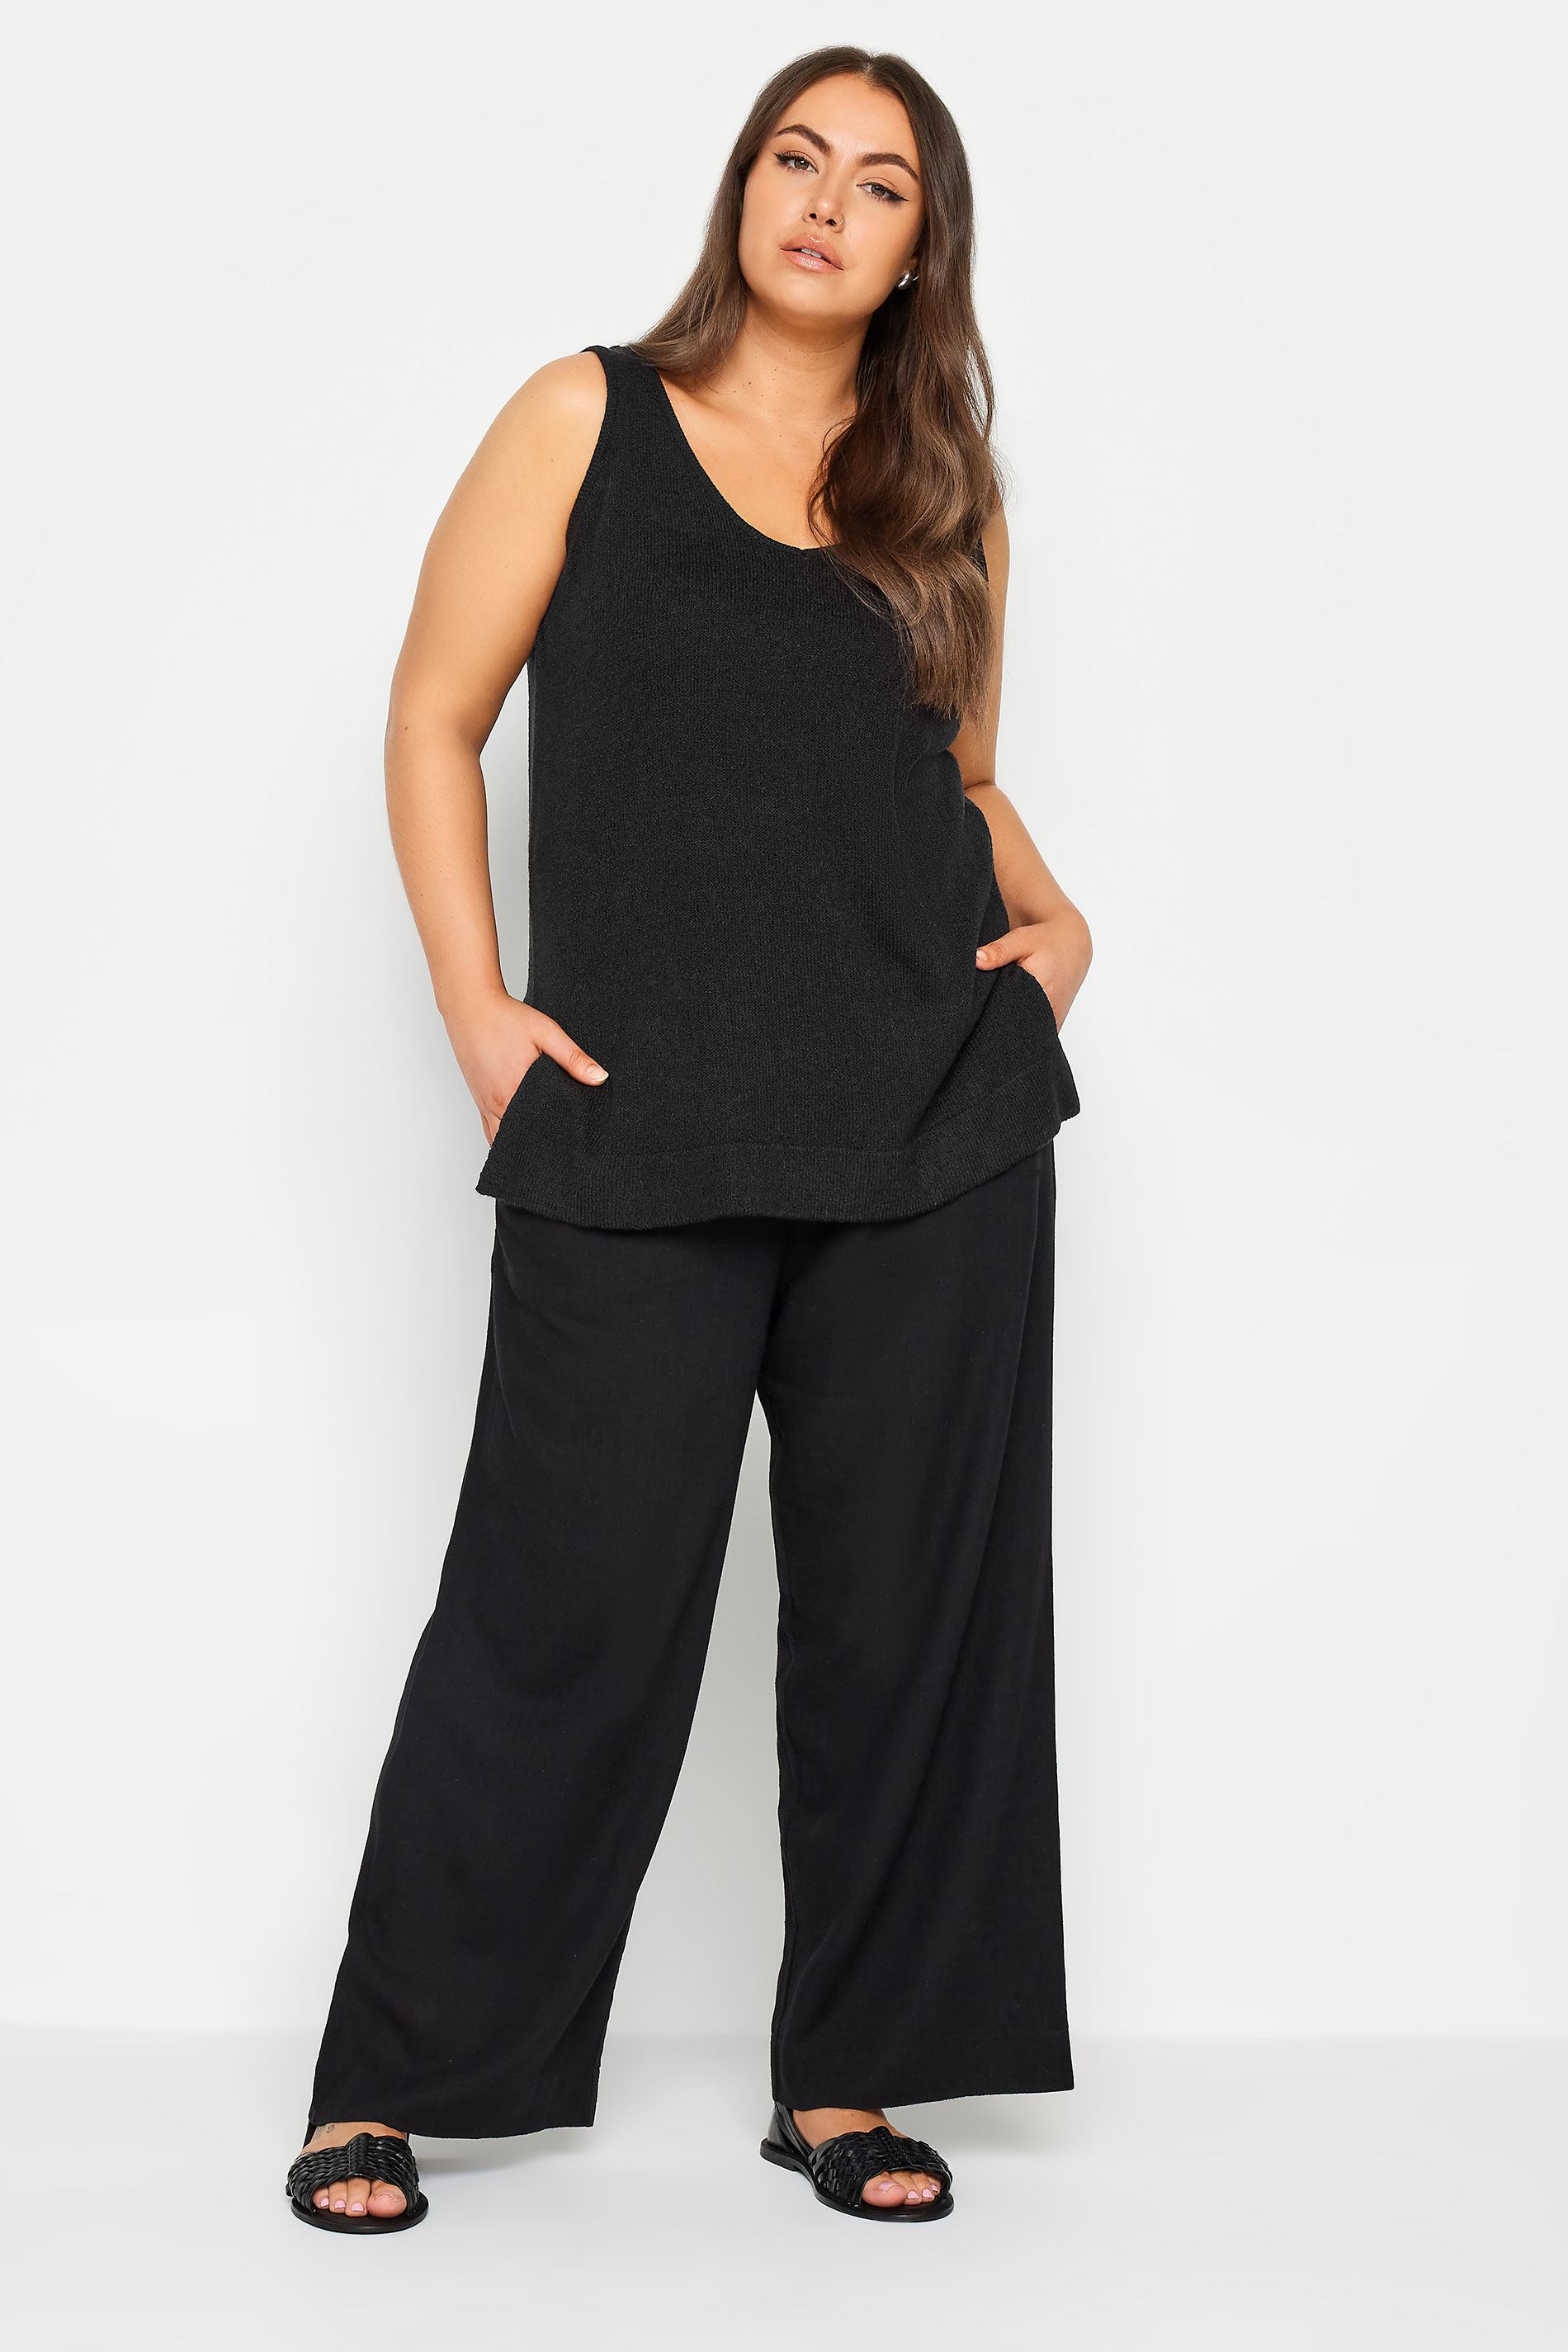 YOURS Plus Size Black Knitted Vest Top | Yours Clothing 2